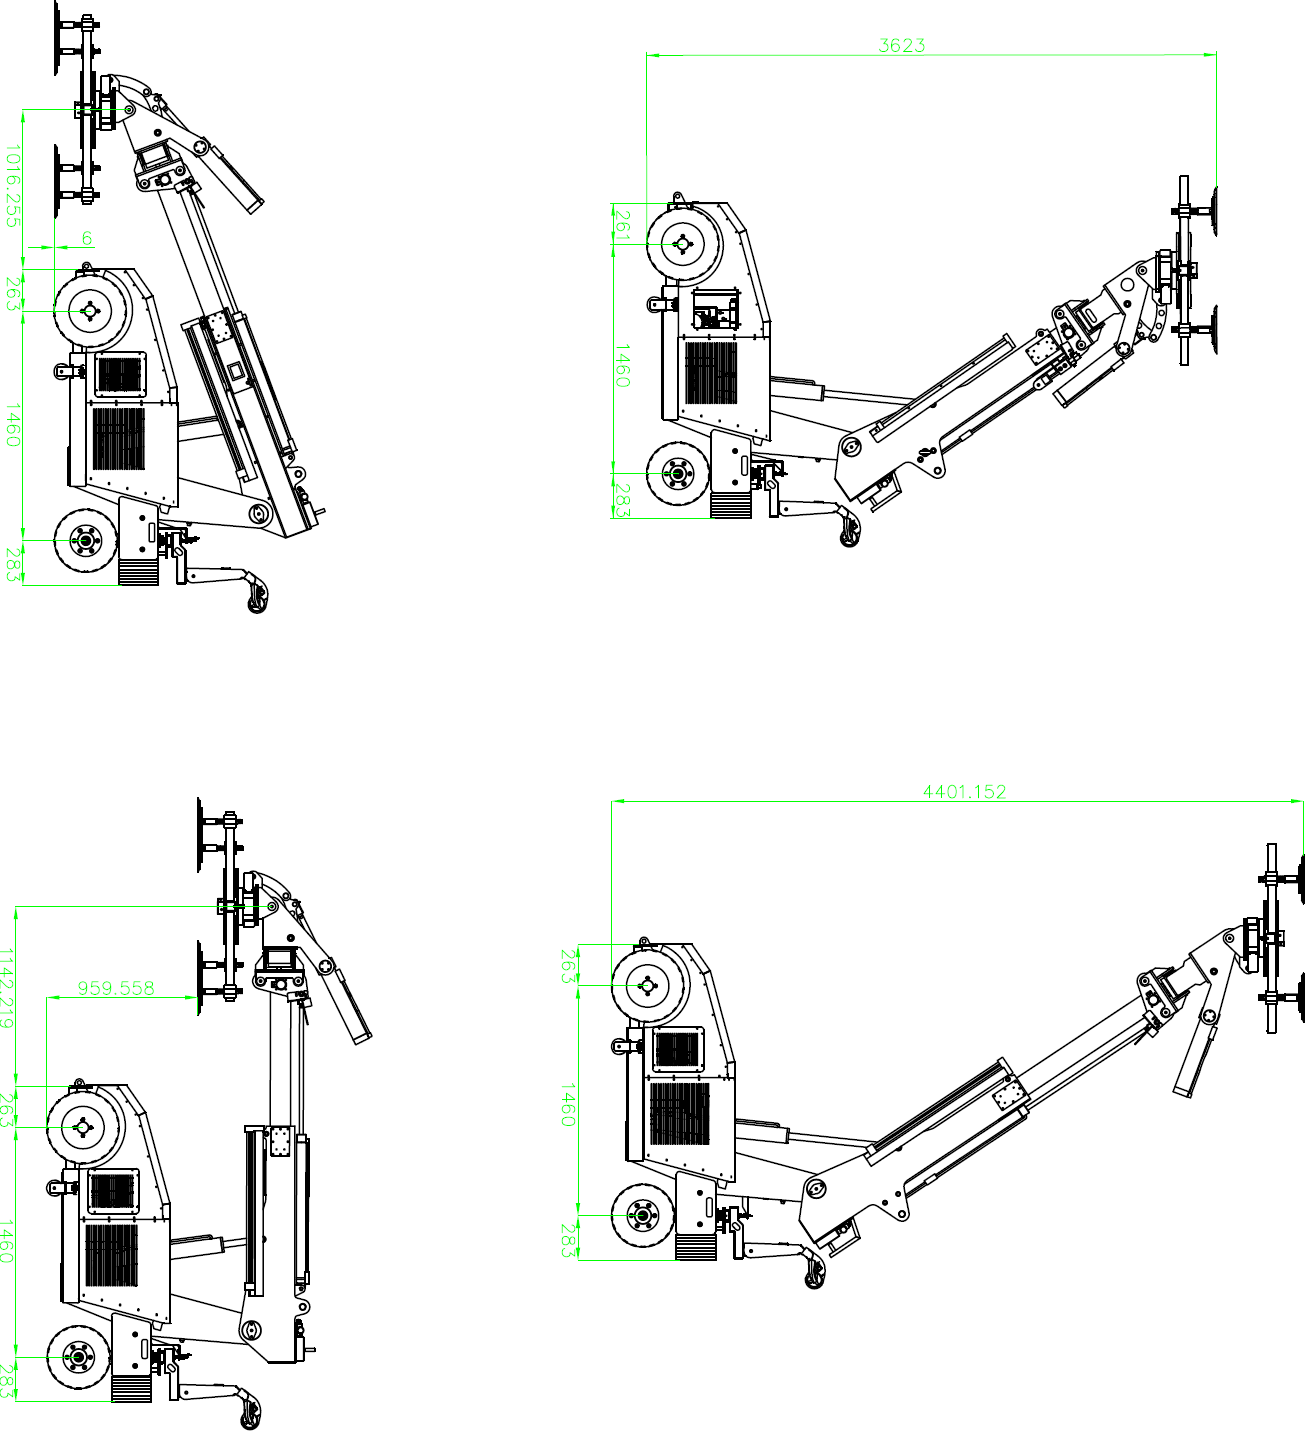 Technical drawing for Vacuum Glass Lifter Robot 800.png